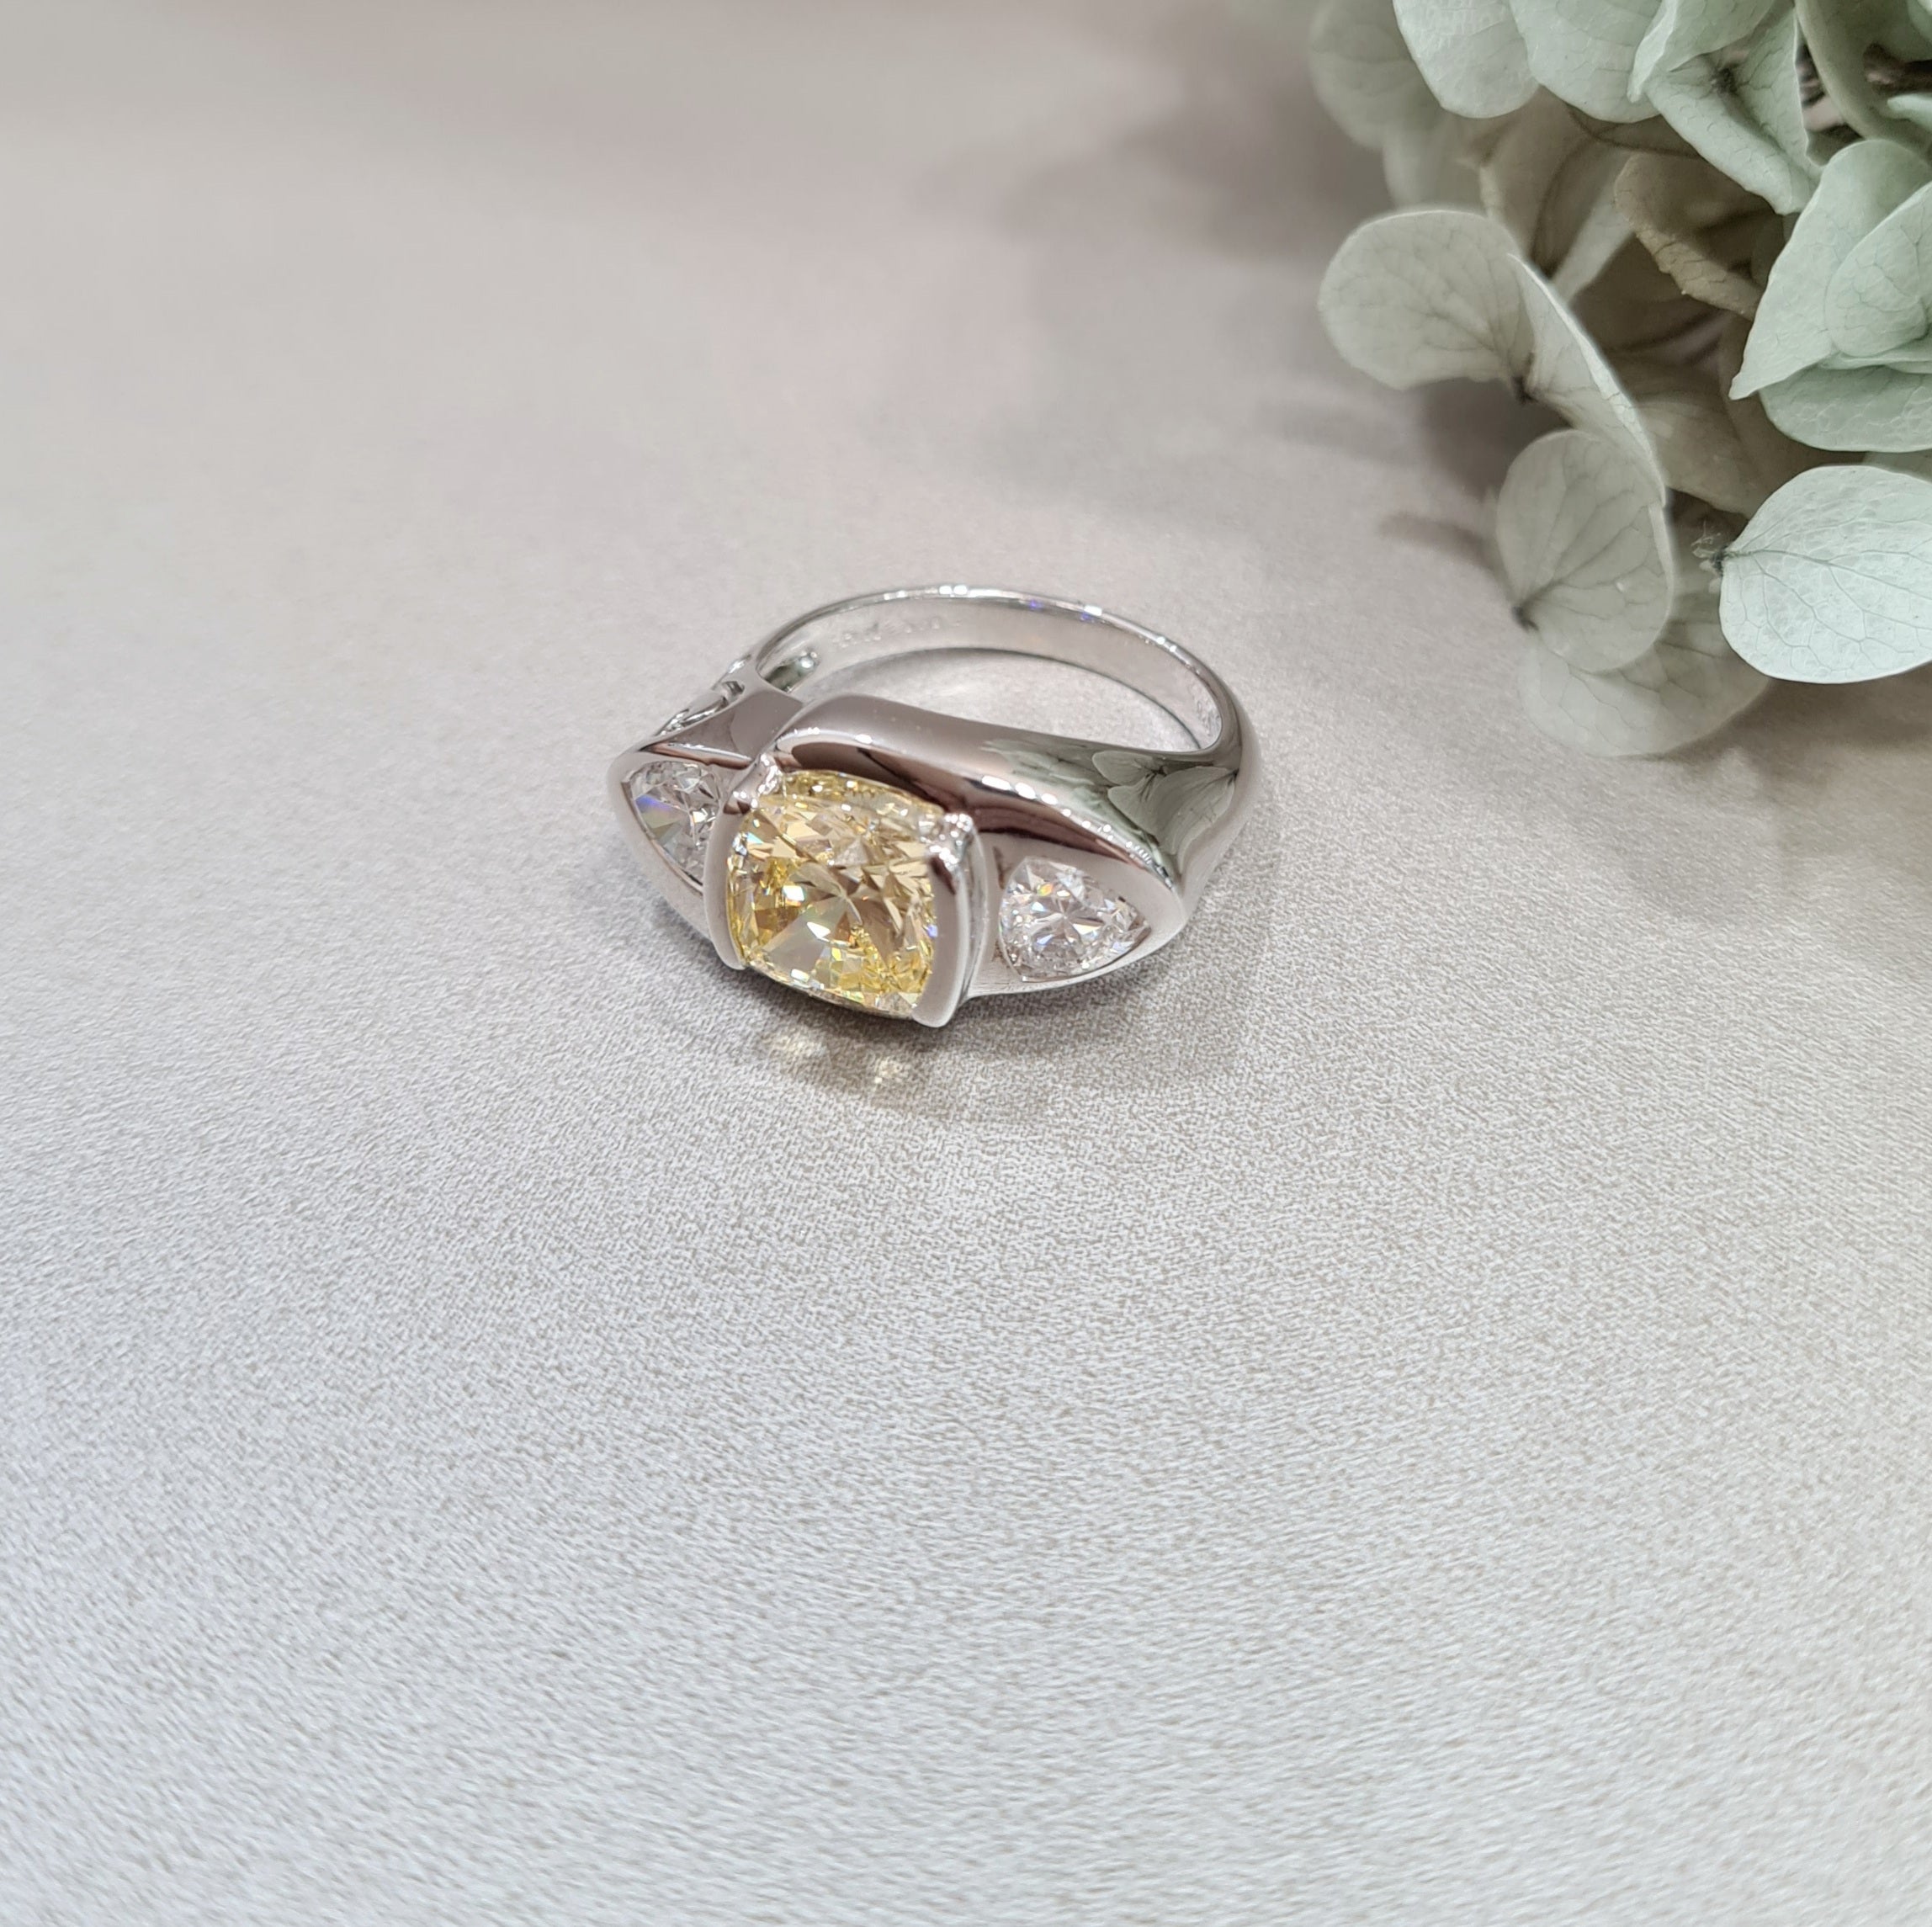 Canary Statement Ring